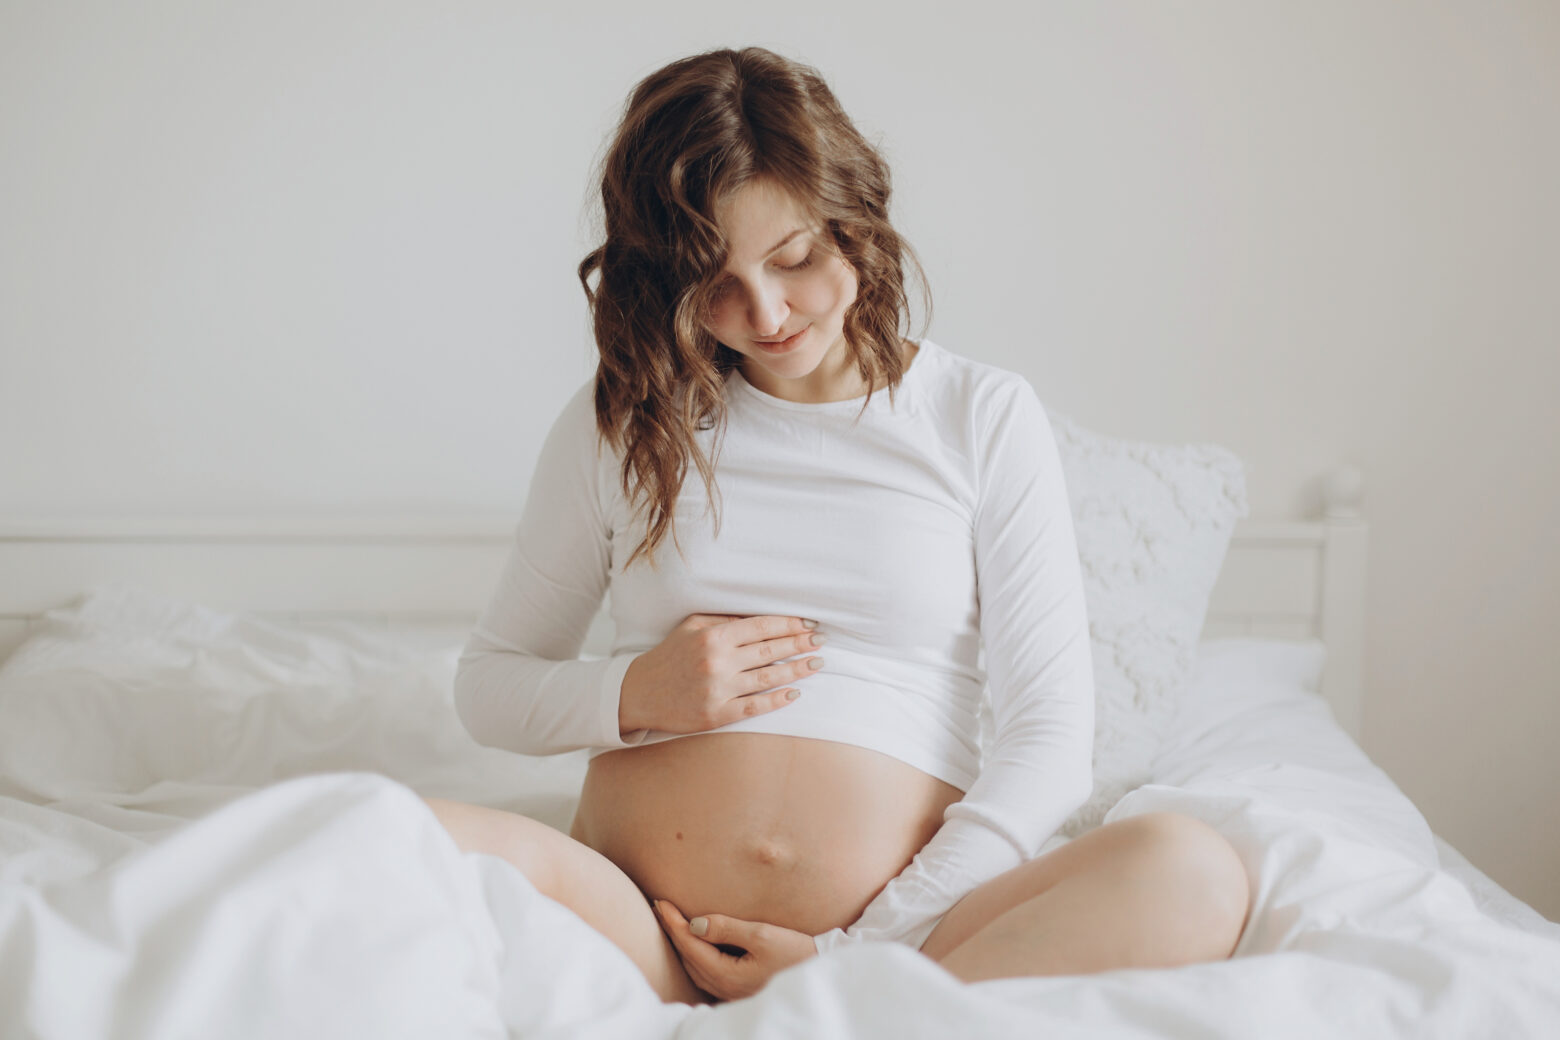 Happy pregnant woman in white holding belly bump and relaxing on white bed at home. Stylish pregnant mom hugging belly with love and care, waiting for baby. Motherhood concept ,maternity time